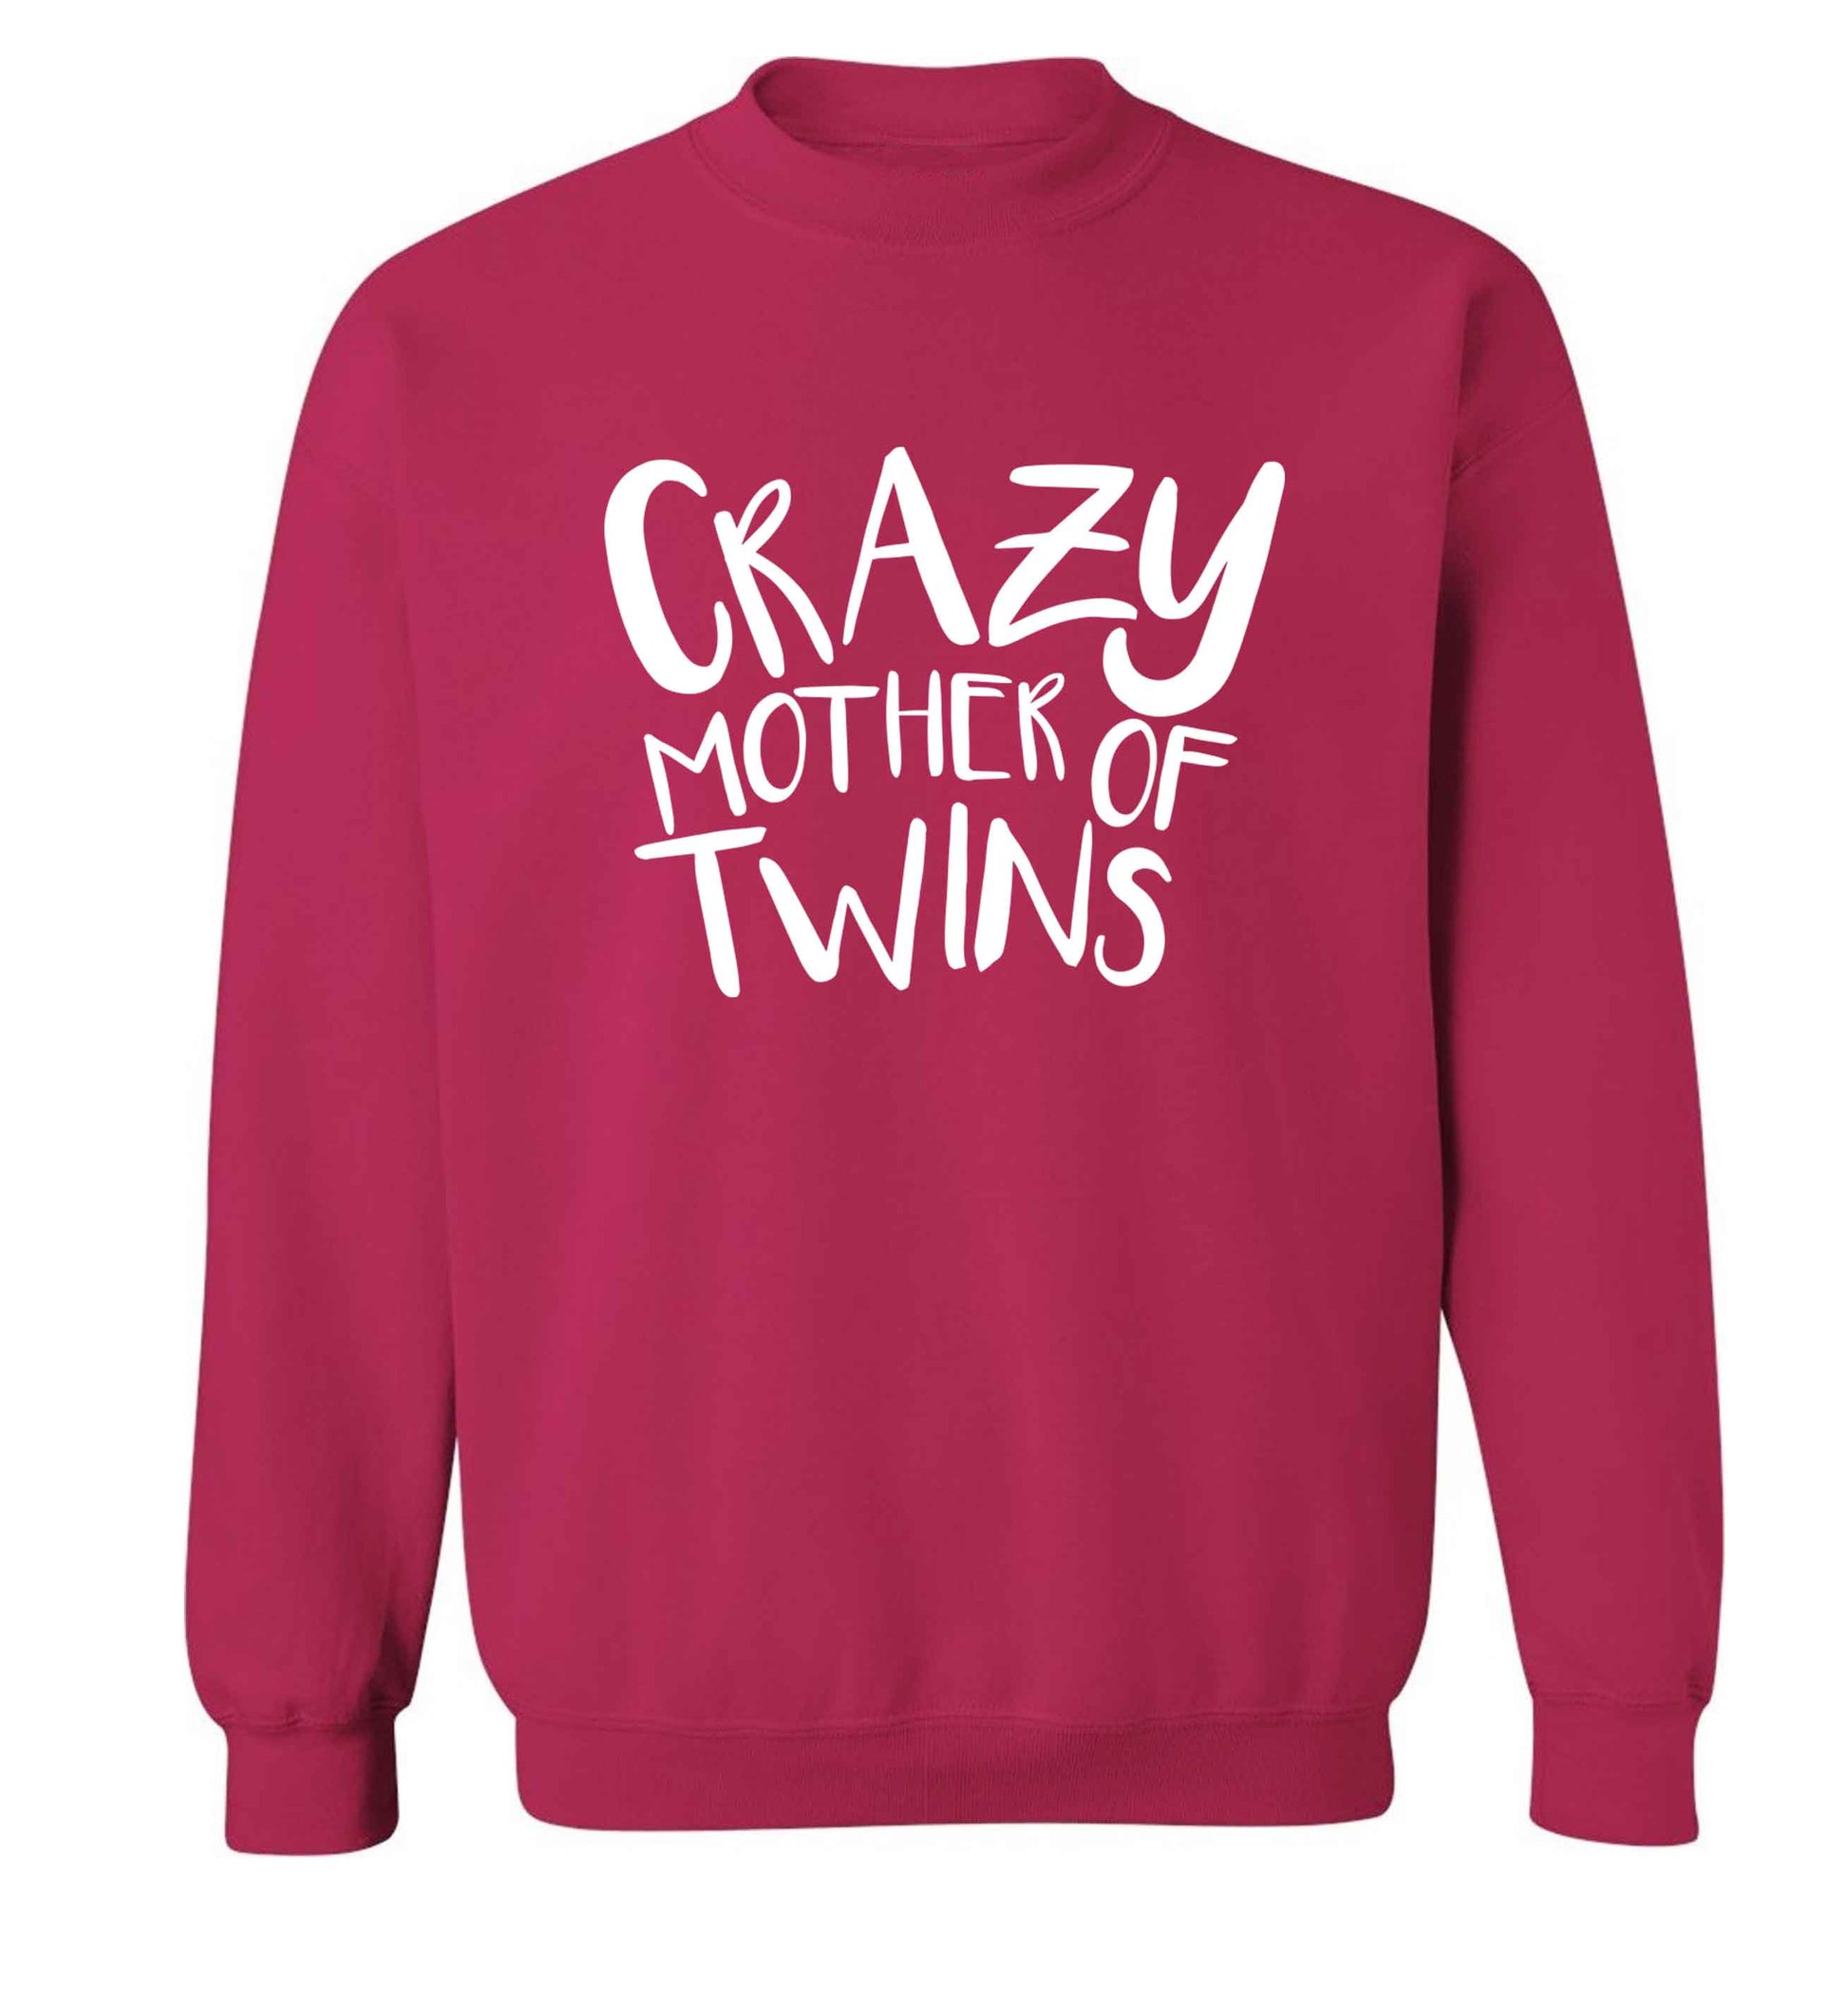 Crazy mother of twins adult's unisex pink sweater 2XL